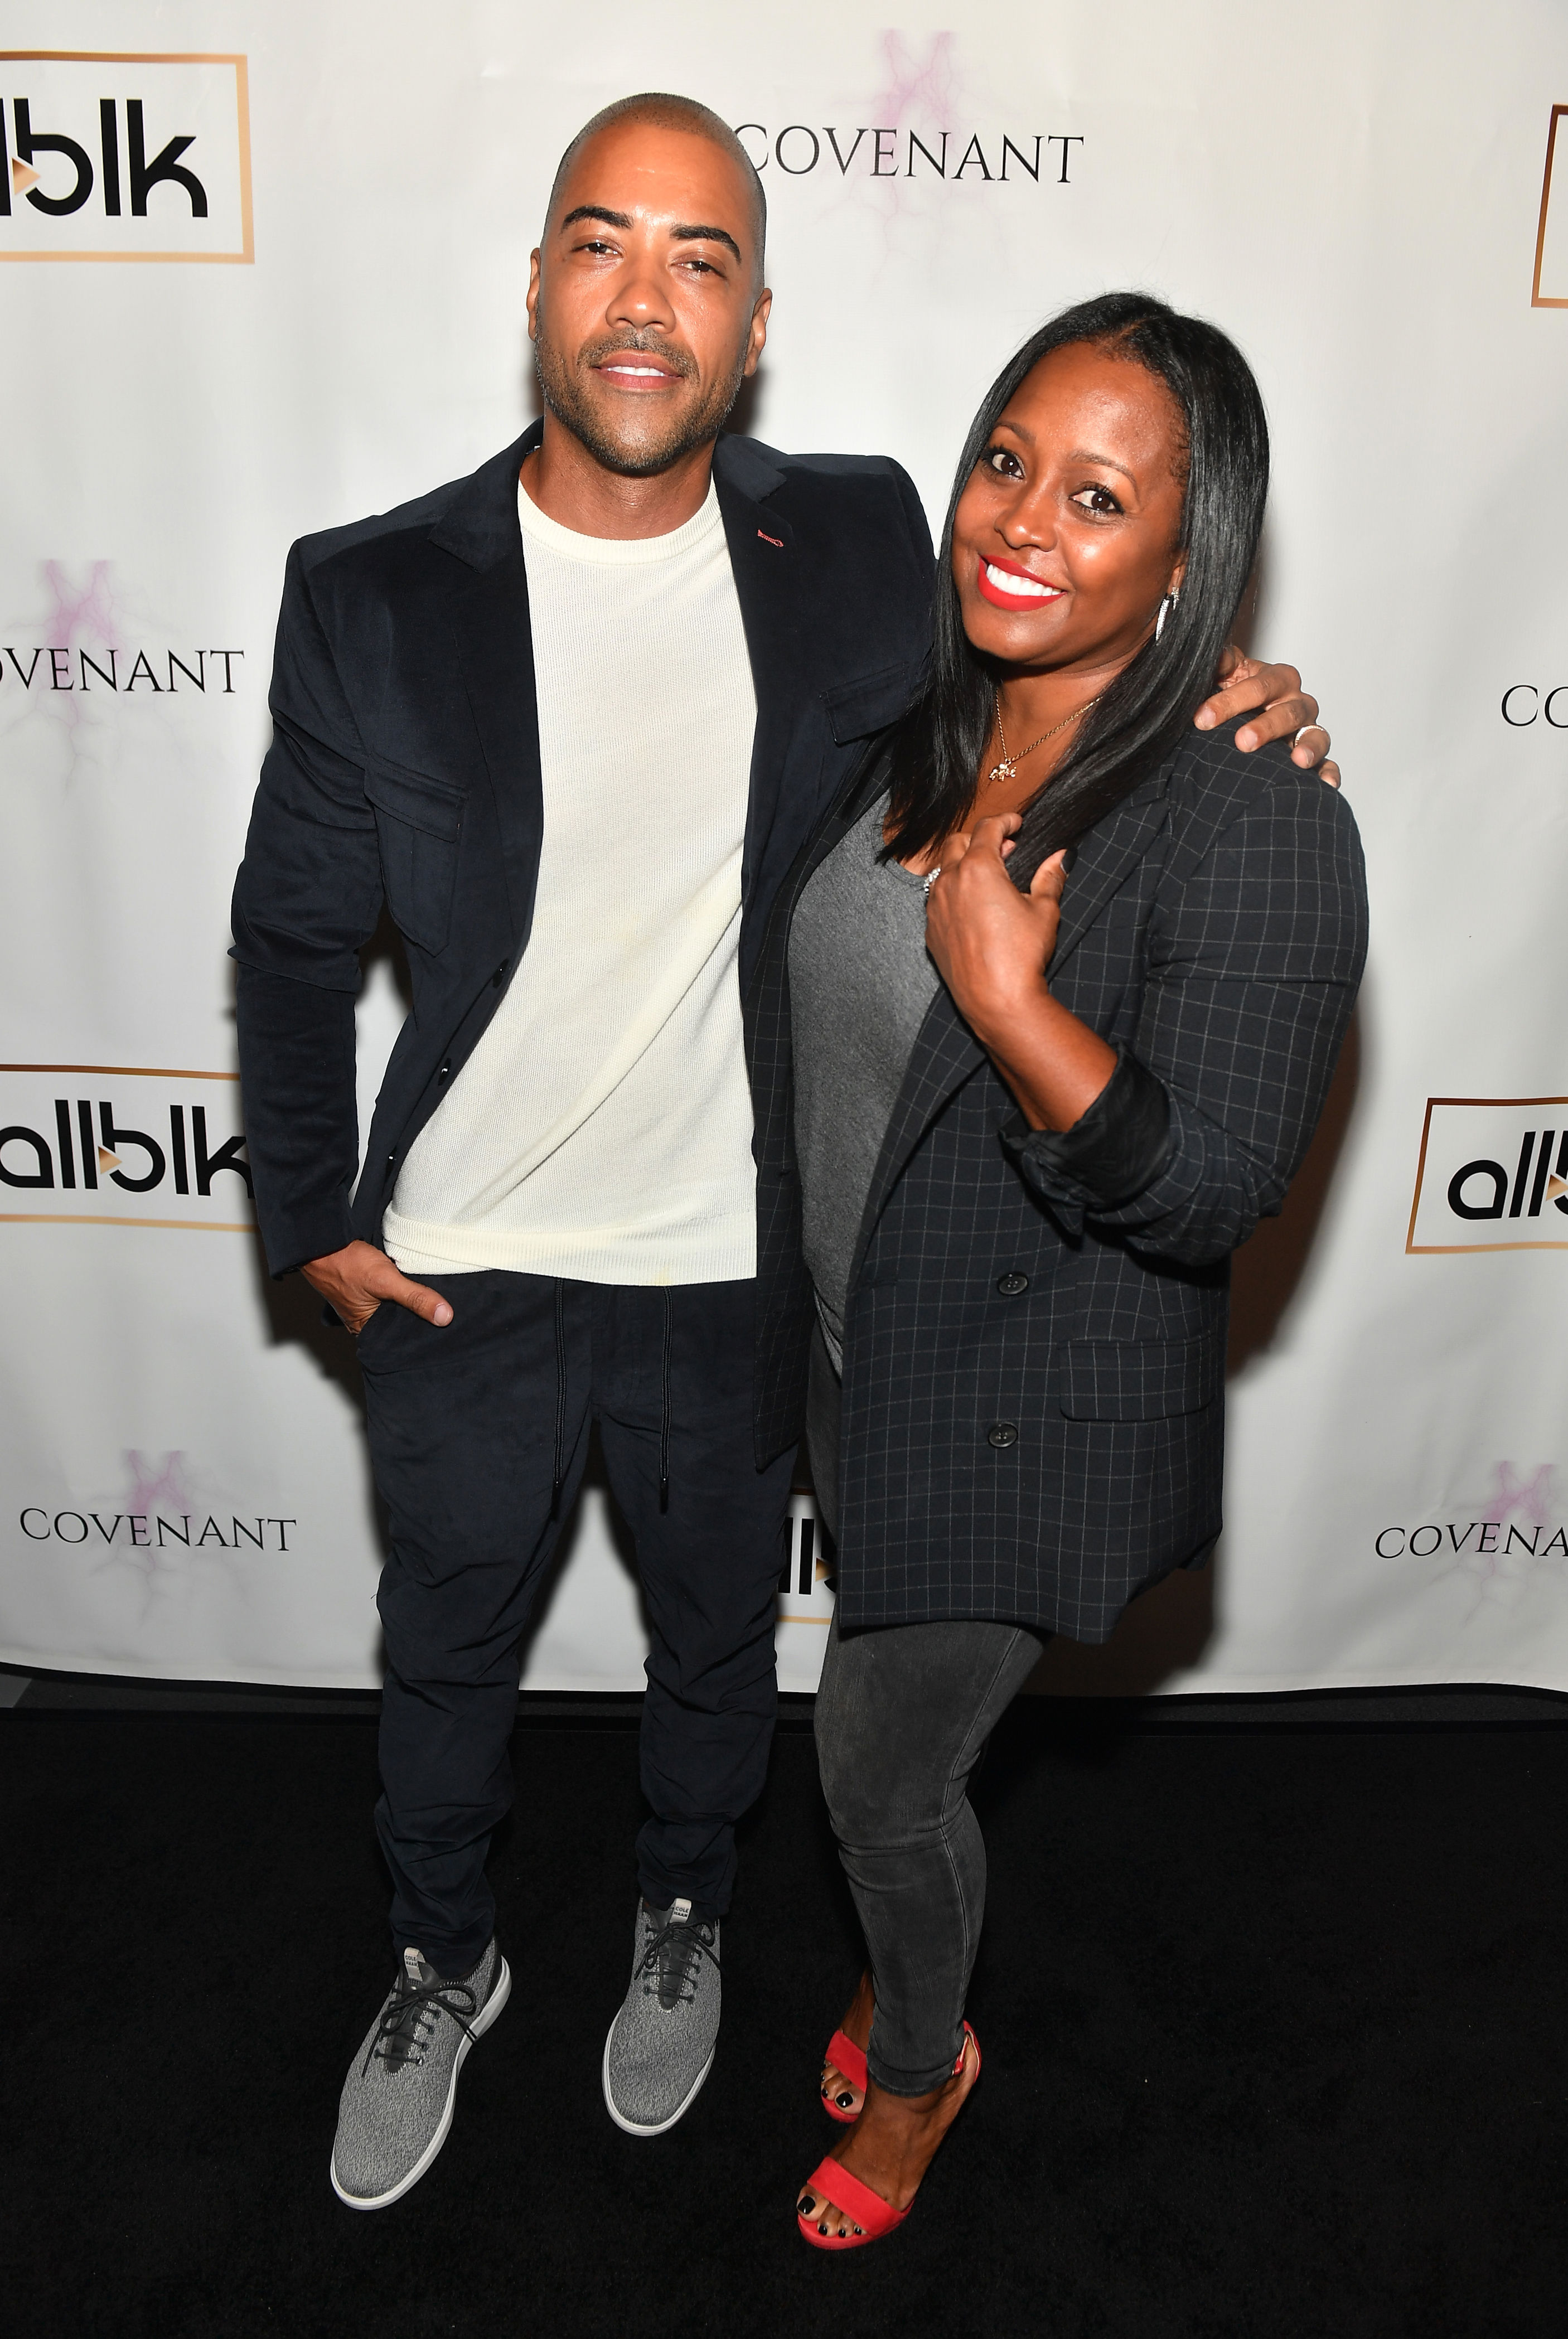 <p>In 2001, Keshia Knight Pulliam graduated with honors from Spelman College. She quickly made her return to Hollywood, appearing in films "Beauty Shop" and "Madea Goes to Jail." Keshia, who lives in Atlanta and runs a production company, also starred on "Tyler Perry's House of Payne" from 2007 to 2012 (and reprised her role in 2020) and competed on reality shows "Splash" in 2013 and "The Apprentice" in 2015. That same year, she got engaged to former NFL player Ed Hartwell, only to marry him a day later on Jan. 1, 2016. But their love story didn't have a happy ending. The two split months later while she was pregnant with daughter Ella Grace, who arrived in 2017. Keshia spent much of her pregnancy in the news due to Ed's insistence that he was not the girl's father. But paternity test results proved that he indeed is. Their divorce was finalized in 2018. </p><p>Later that year, she appeared on the first season of an American "Celebrity Big Brother," but she was the second person evicted from the house. In 2021, she appeared in the film "Redeemed." In recent years, Keshia, who's promoted herself as a chef, launched her own spice line, Keshia's Kitchen. In 2021, she married actor Brad James (pictured), with whom she had a baby in 2023.</p>